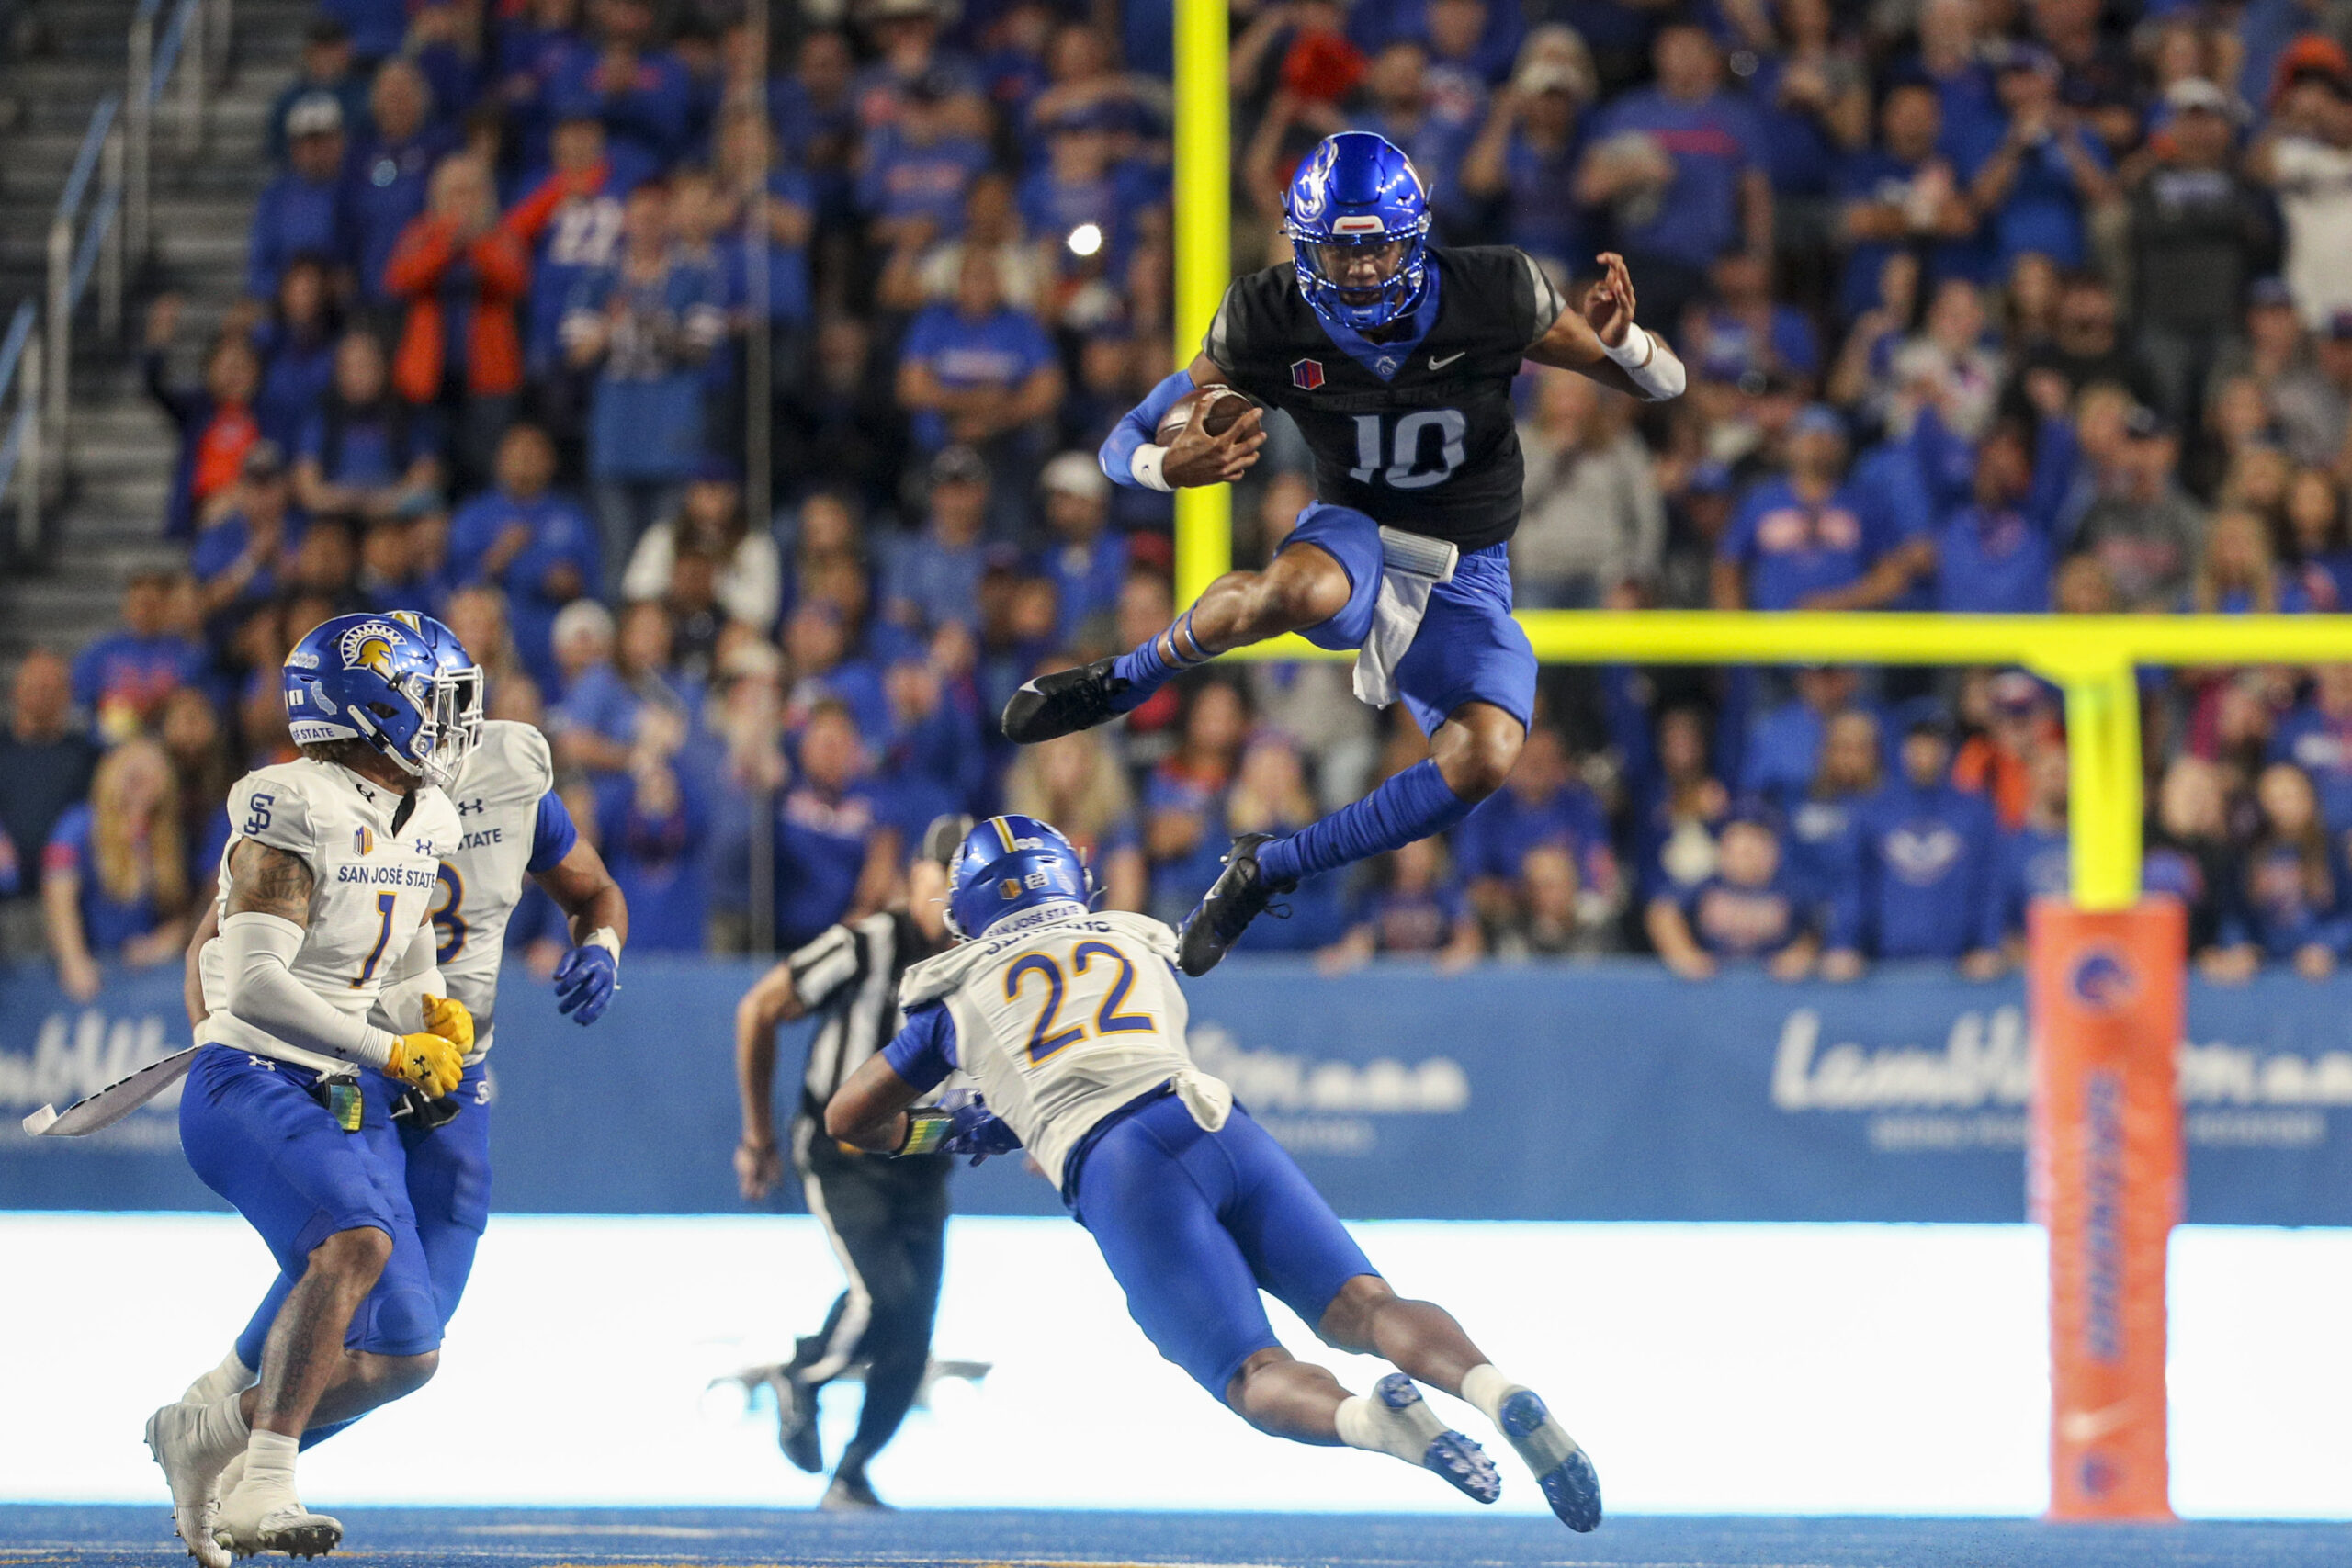 Mountain West power rankings: Fresno State and Air Force on top as